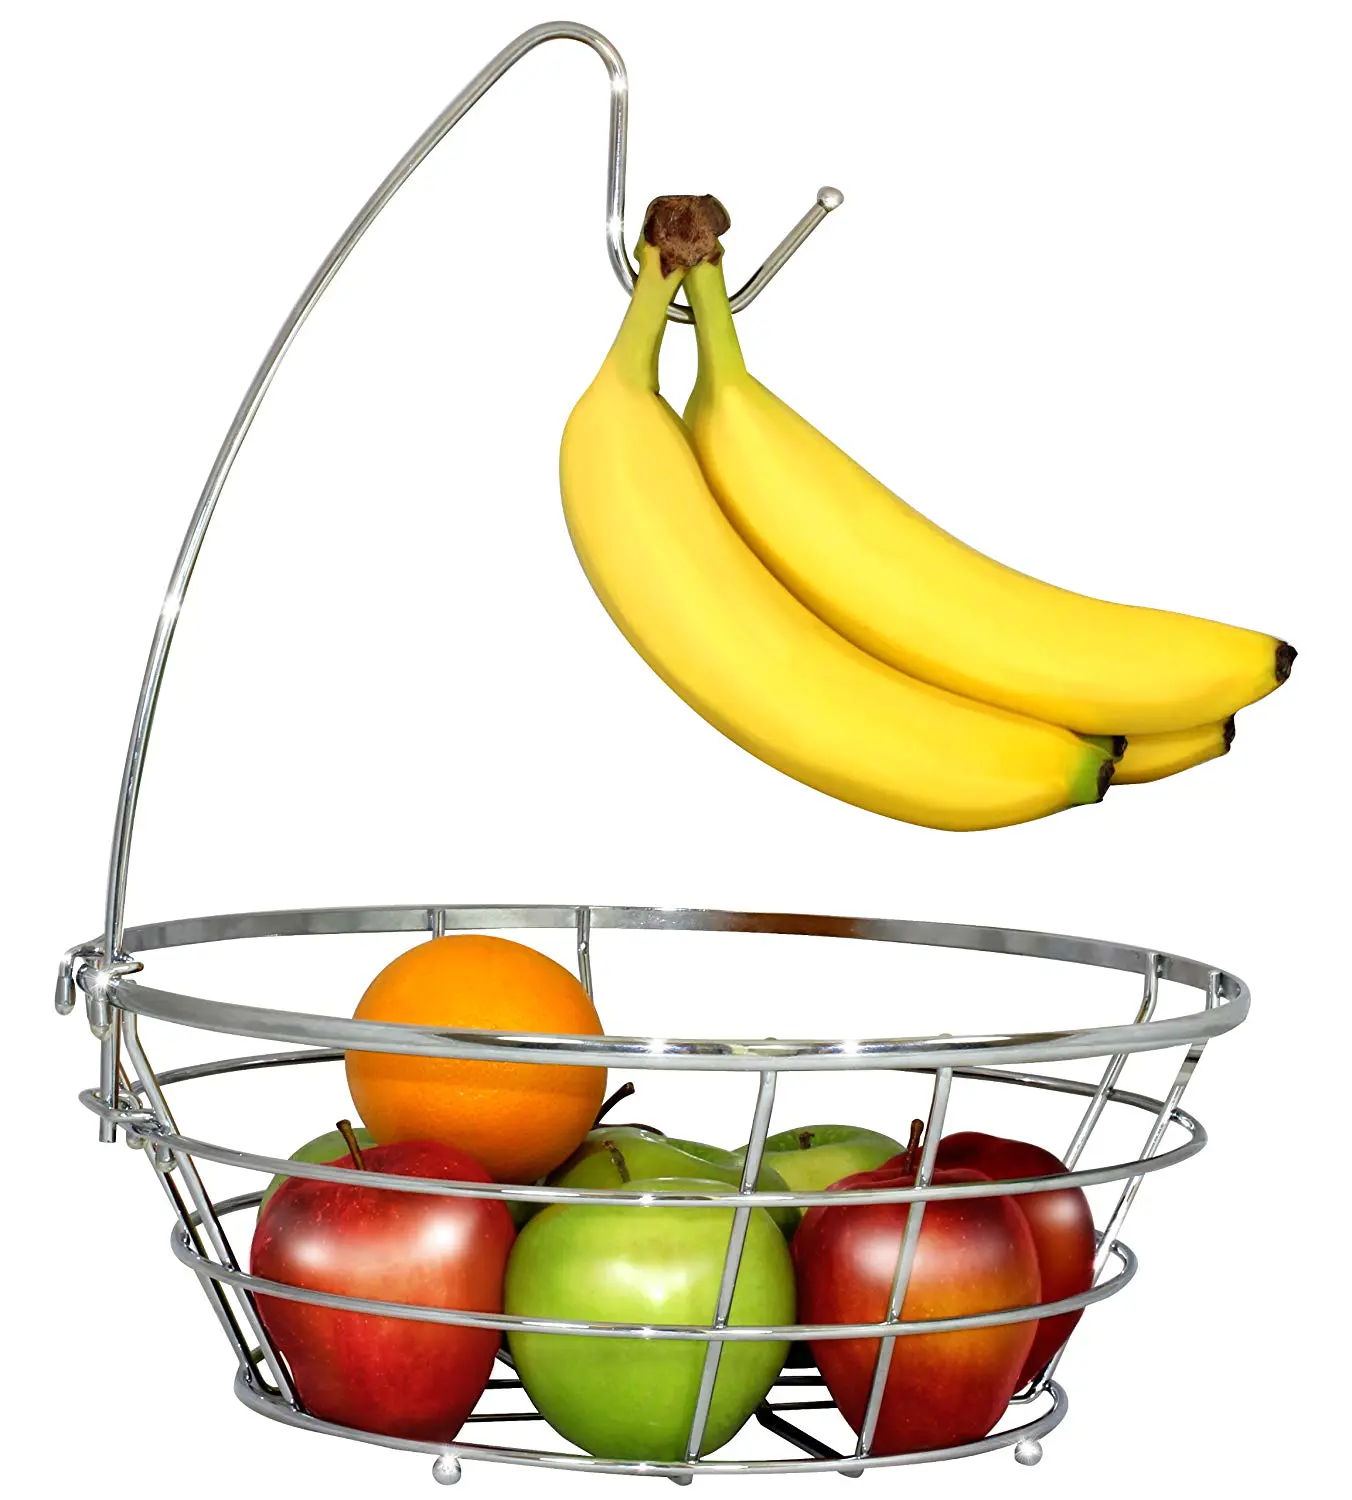 Hot sale round living room metal wire fruit storage basket with banana holder